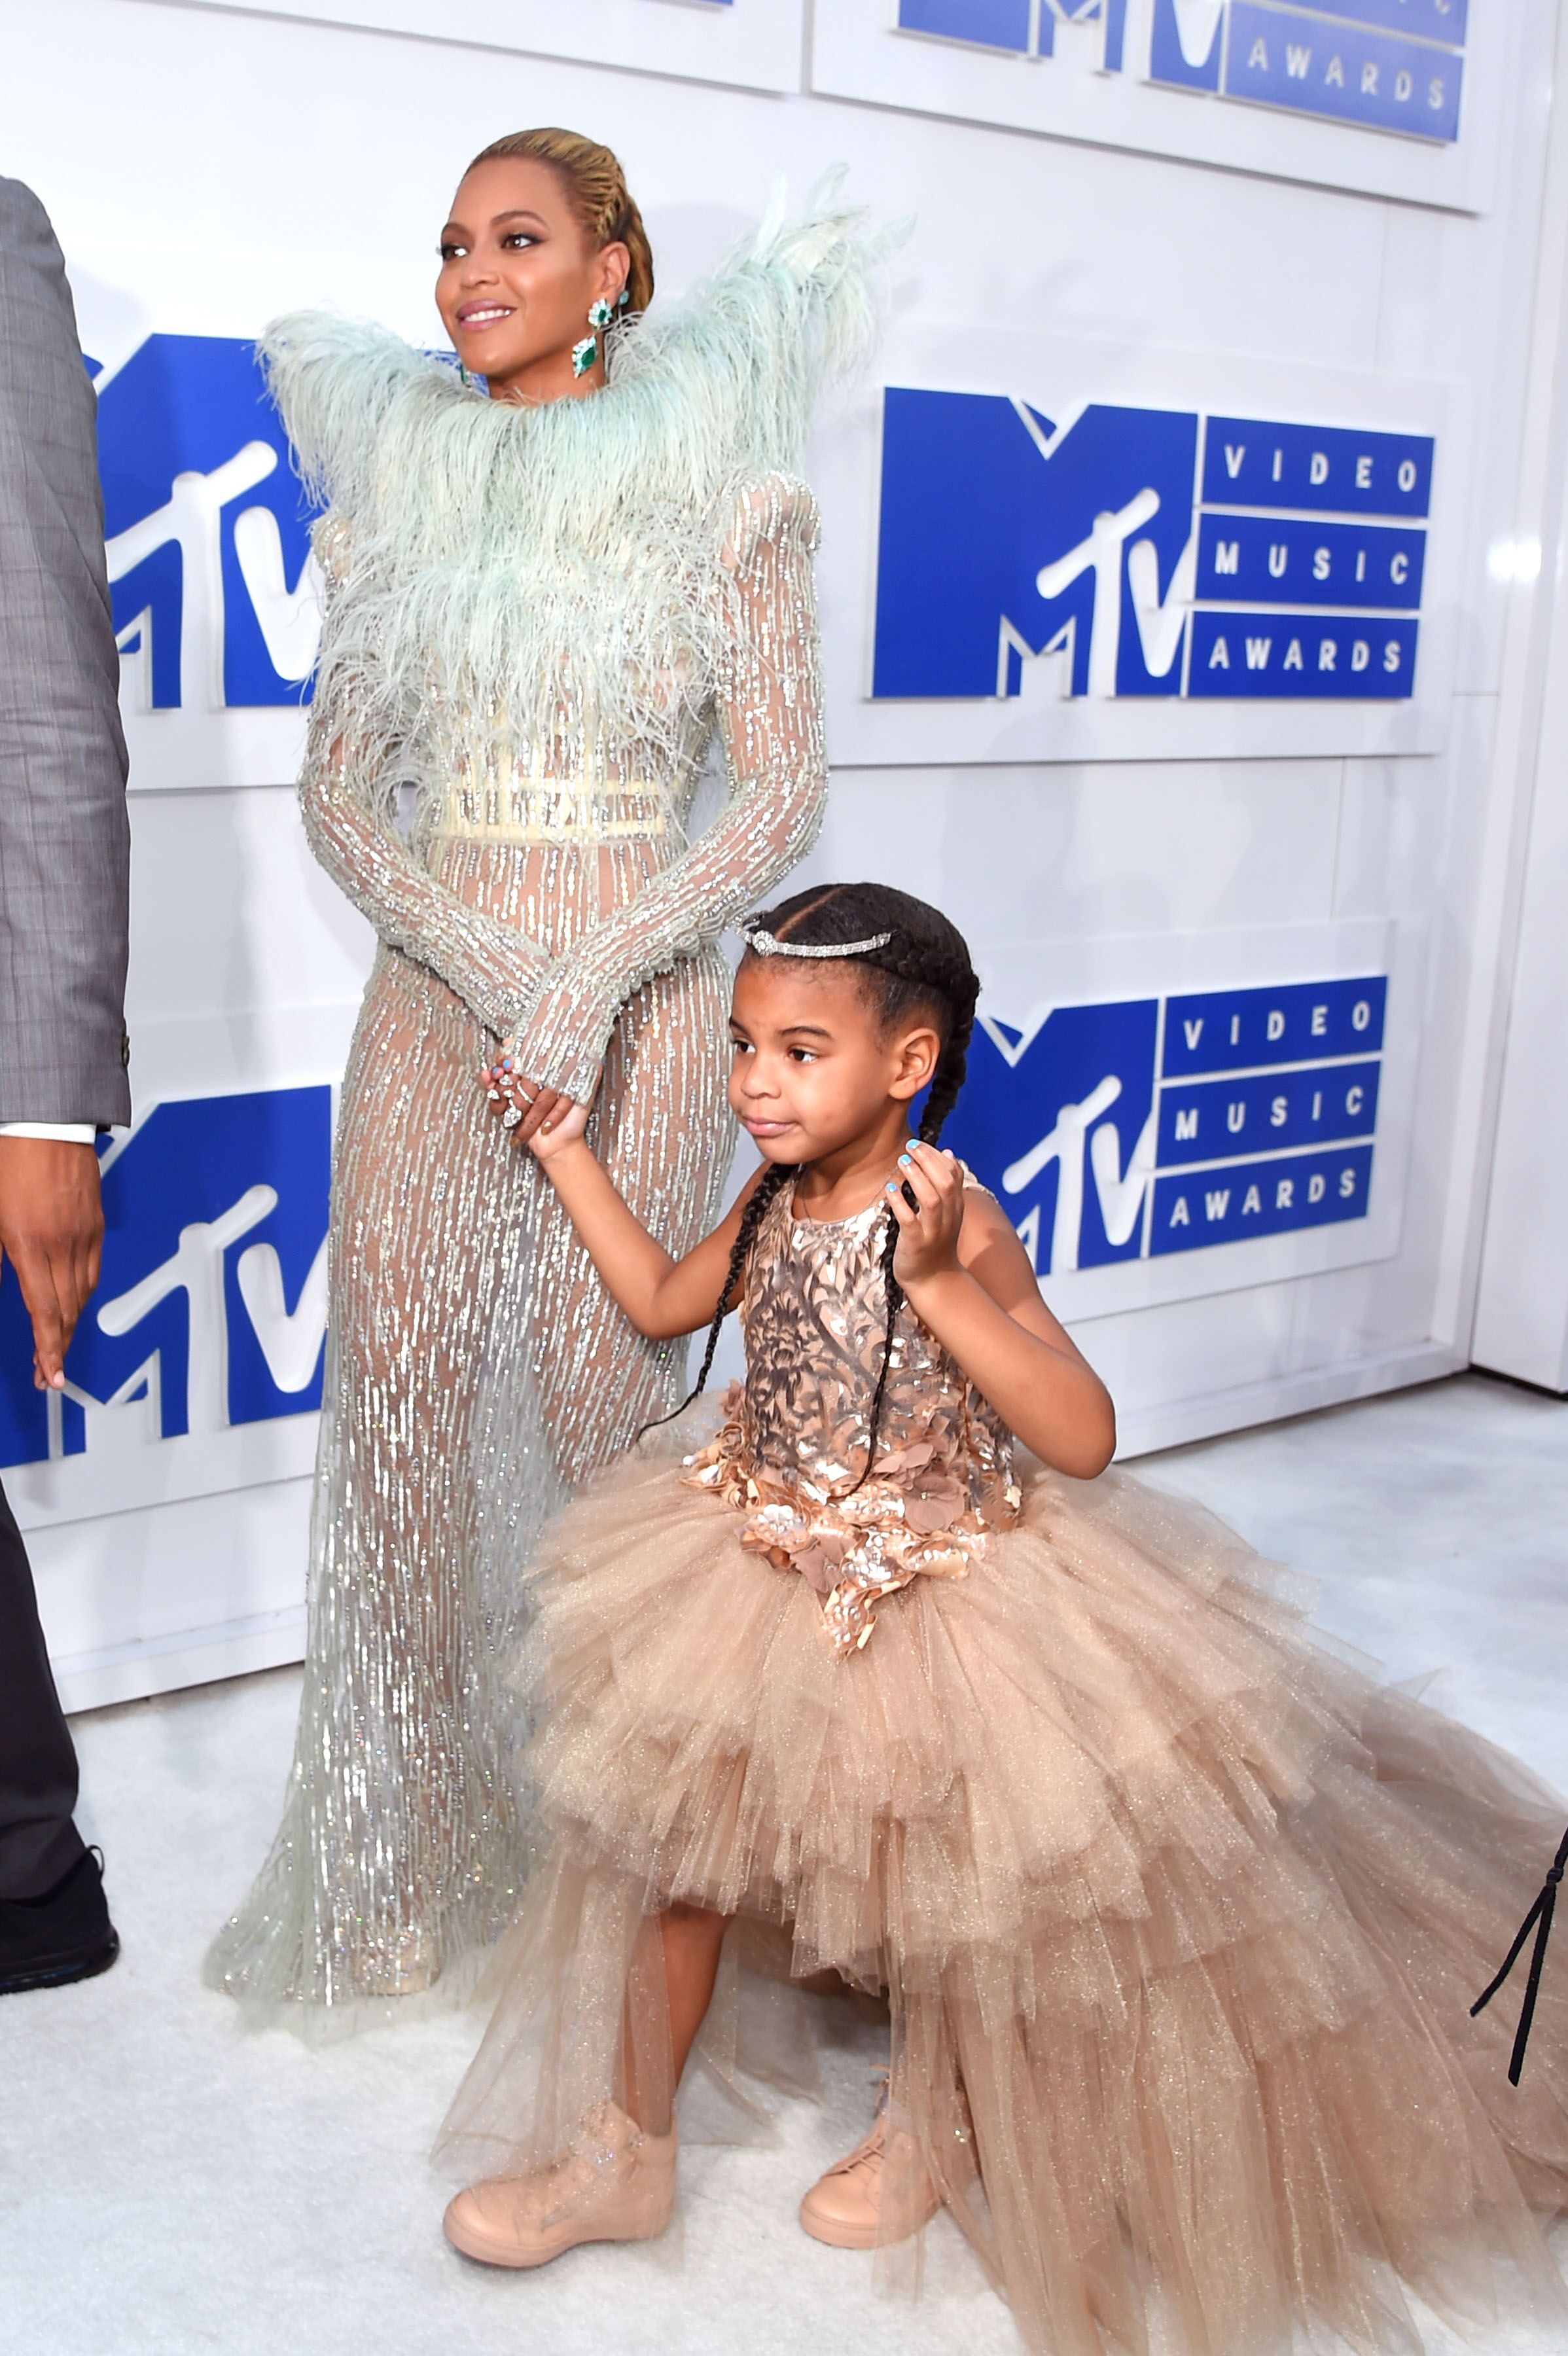 Beyoncé and Blue Ivy at the 2016 MTV Video Music Awards in New York in 2016 | Source: Getty Images